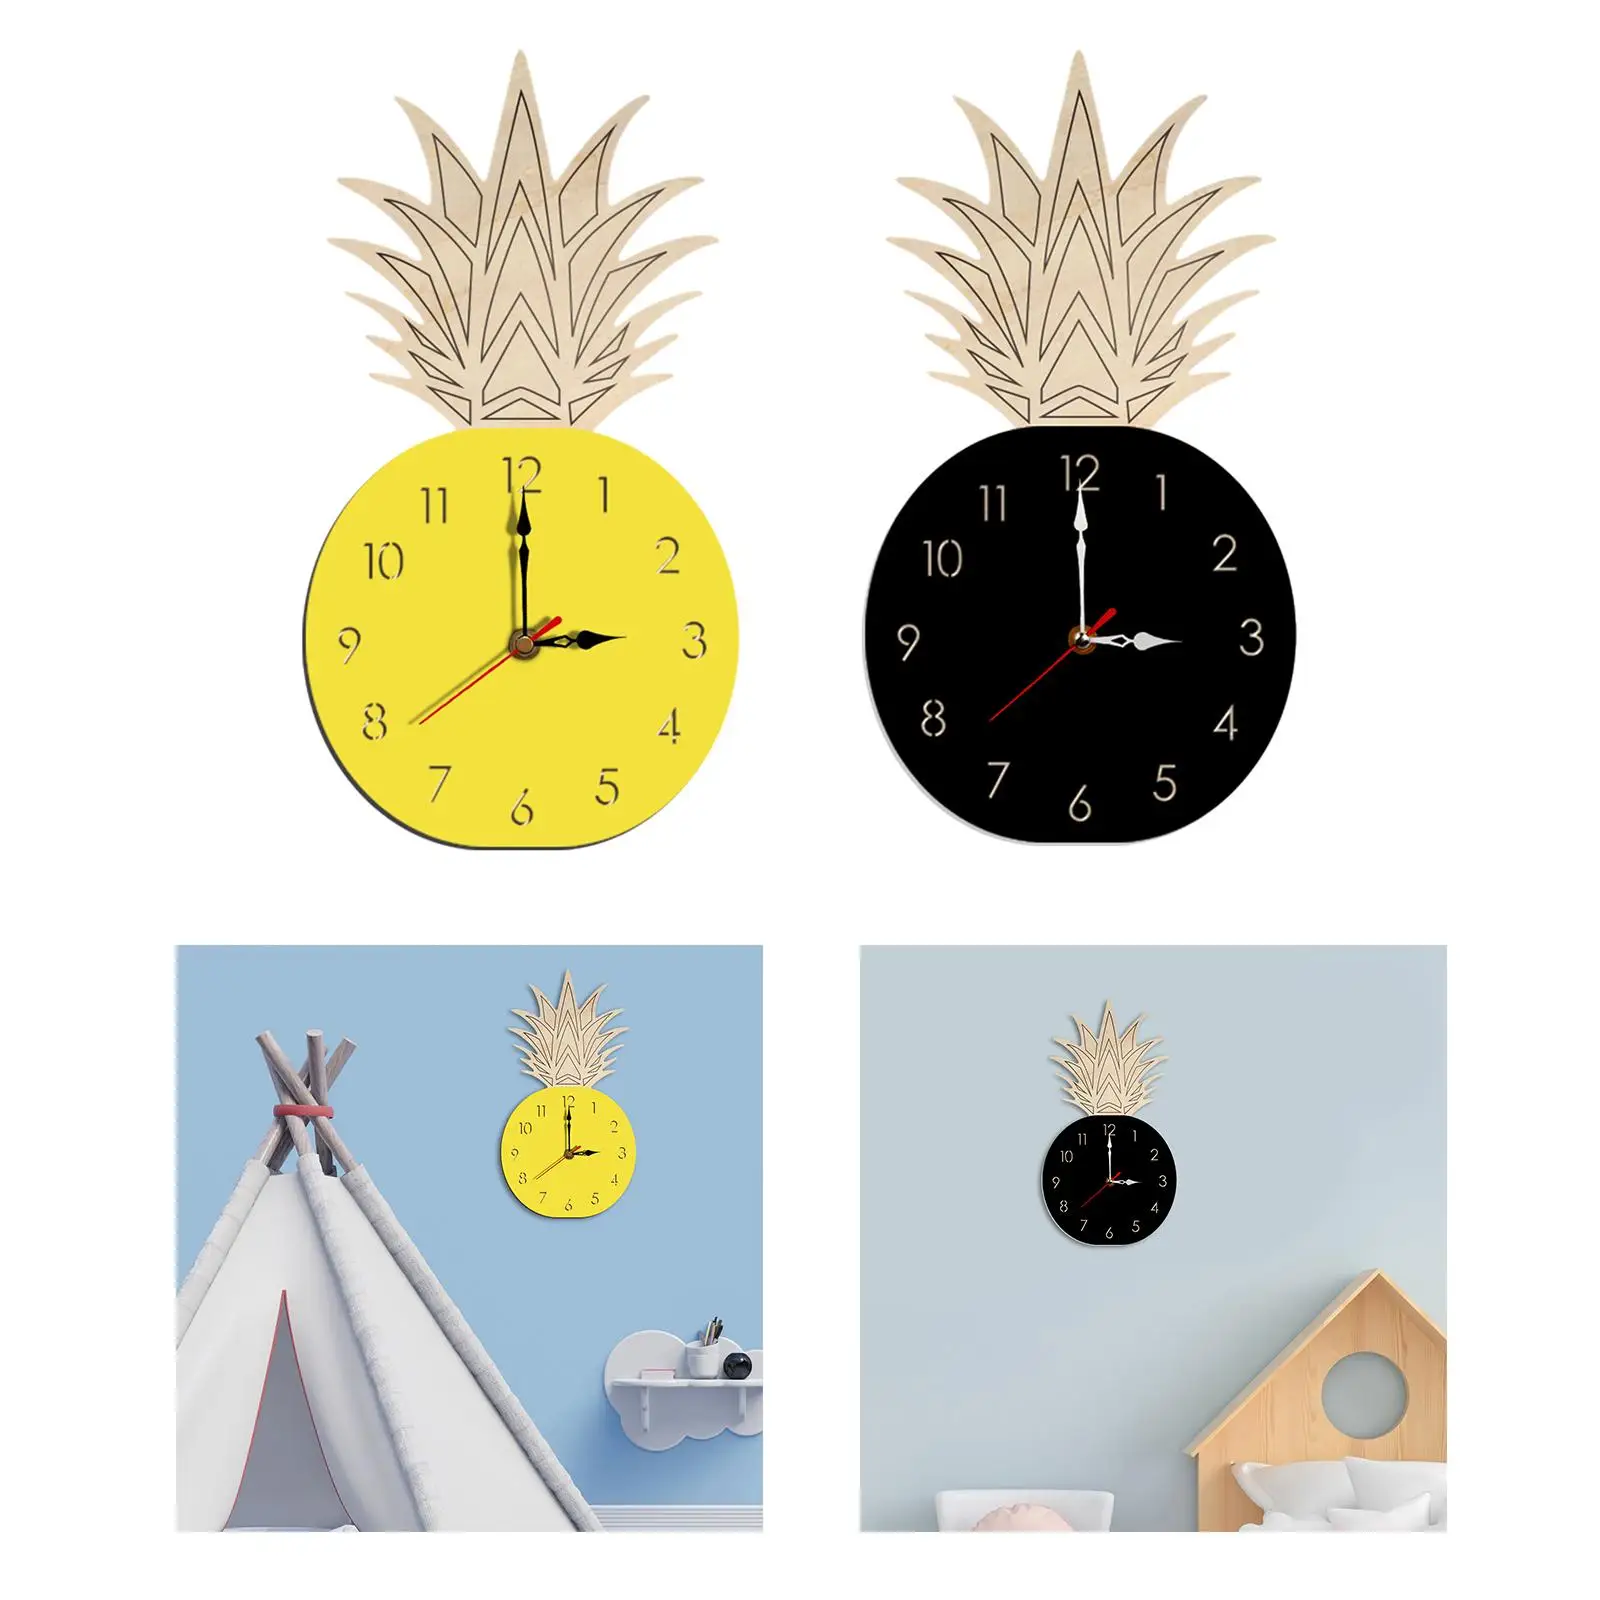 Pineapple Fruit Wall Clock Silent Cartoon for Office Kitchen Home Decoration